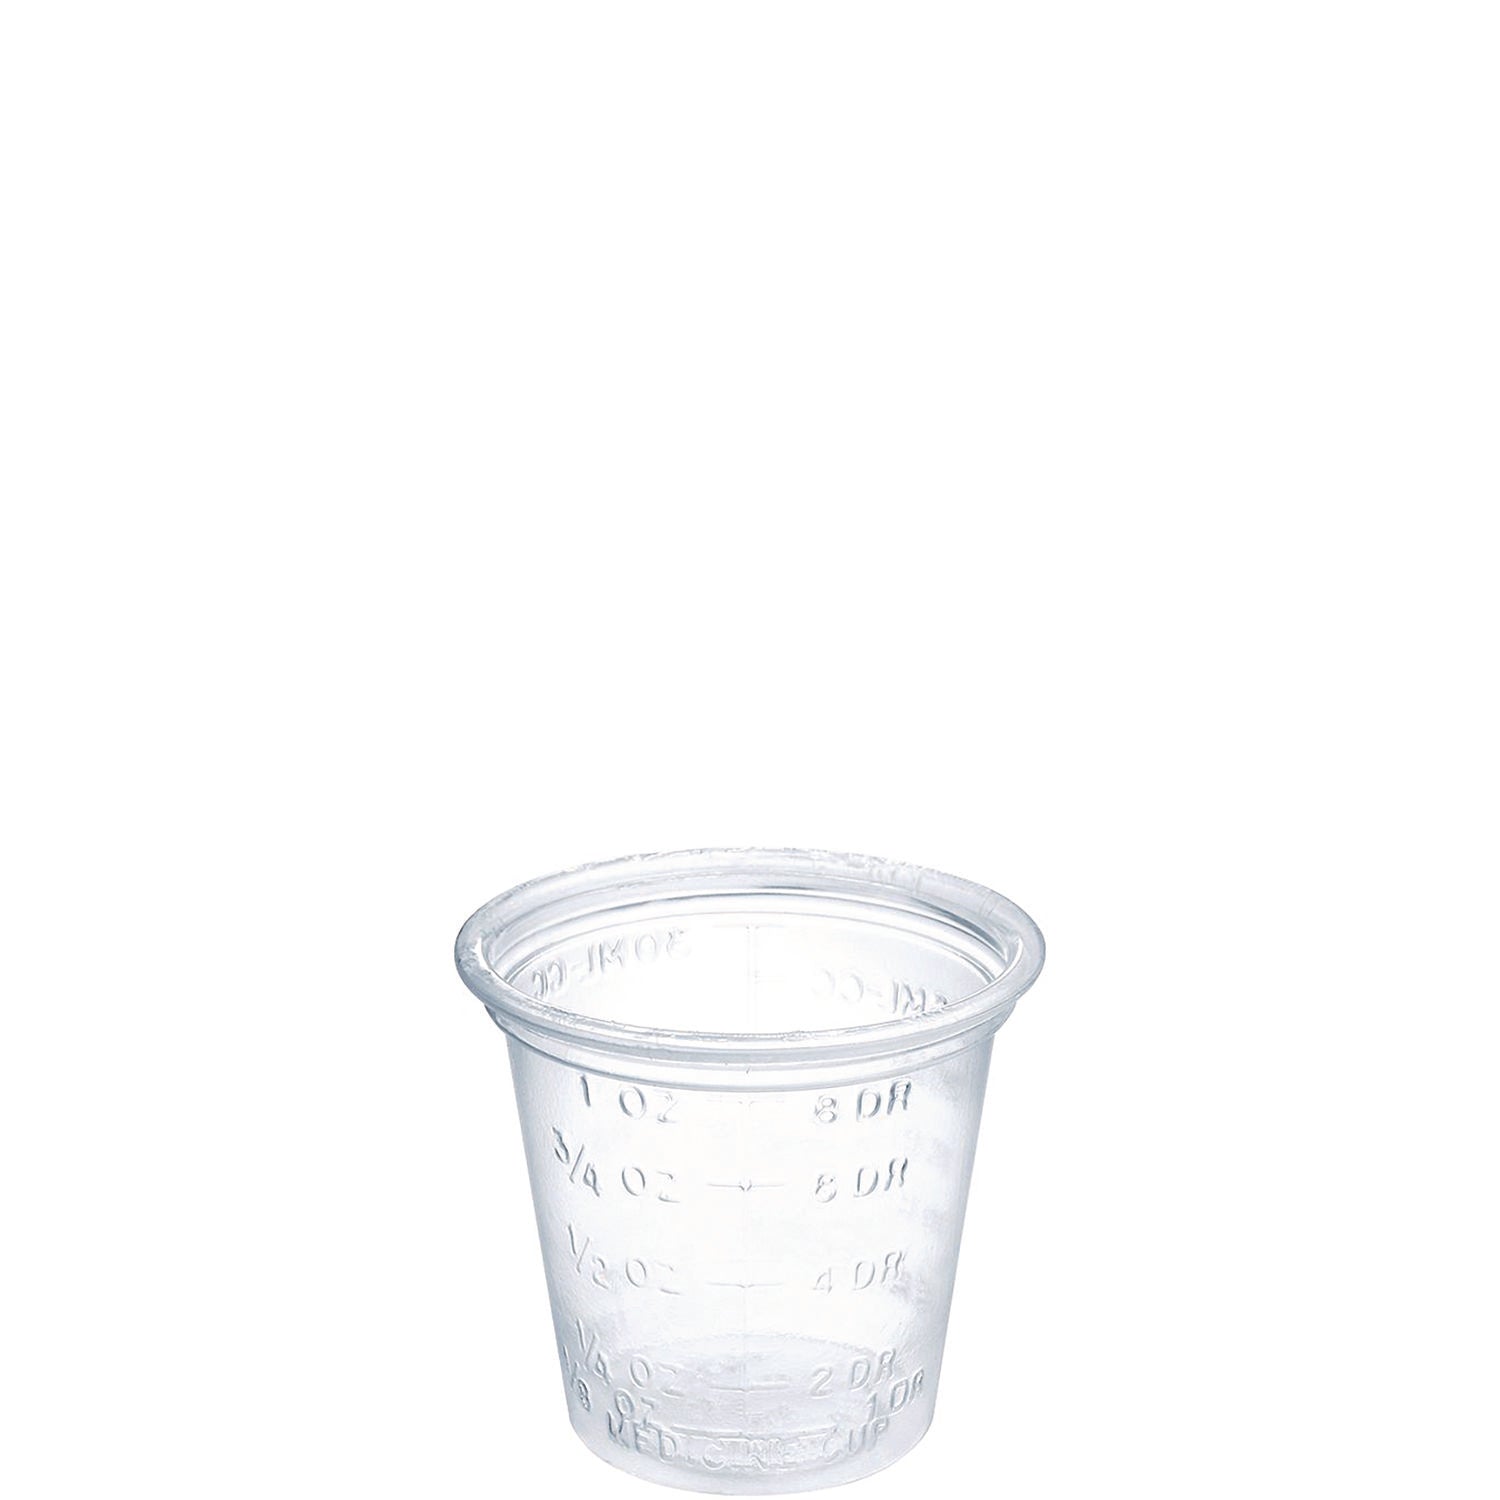 polystyrene-graduated-medical-and-dental-cups-1-oz-clear-graduated-5000-carton_dccp101m - 1